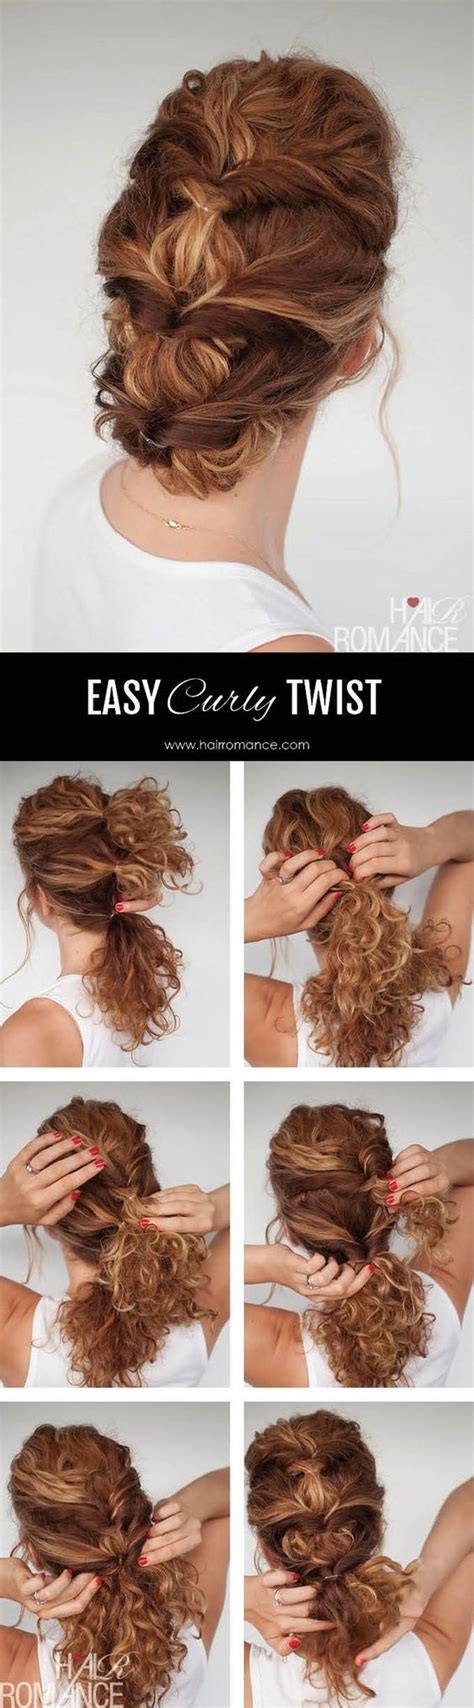 Prom hair updos stay trendy from year to year due to their gorgeous look and versatility. 16 Easy Updo Hair Tutorials for the Season - Pretty Designs